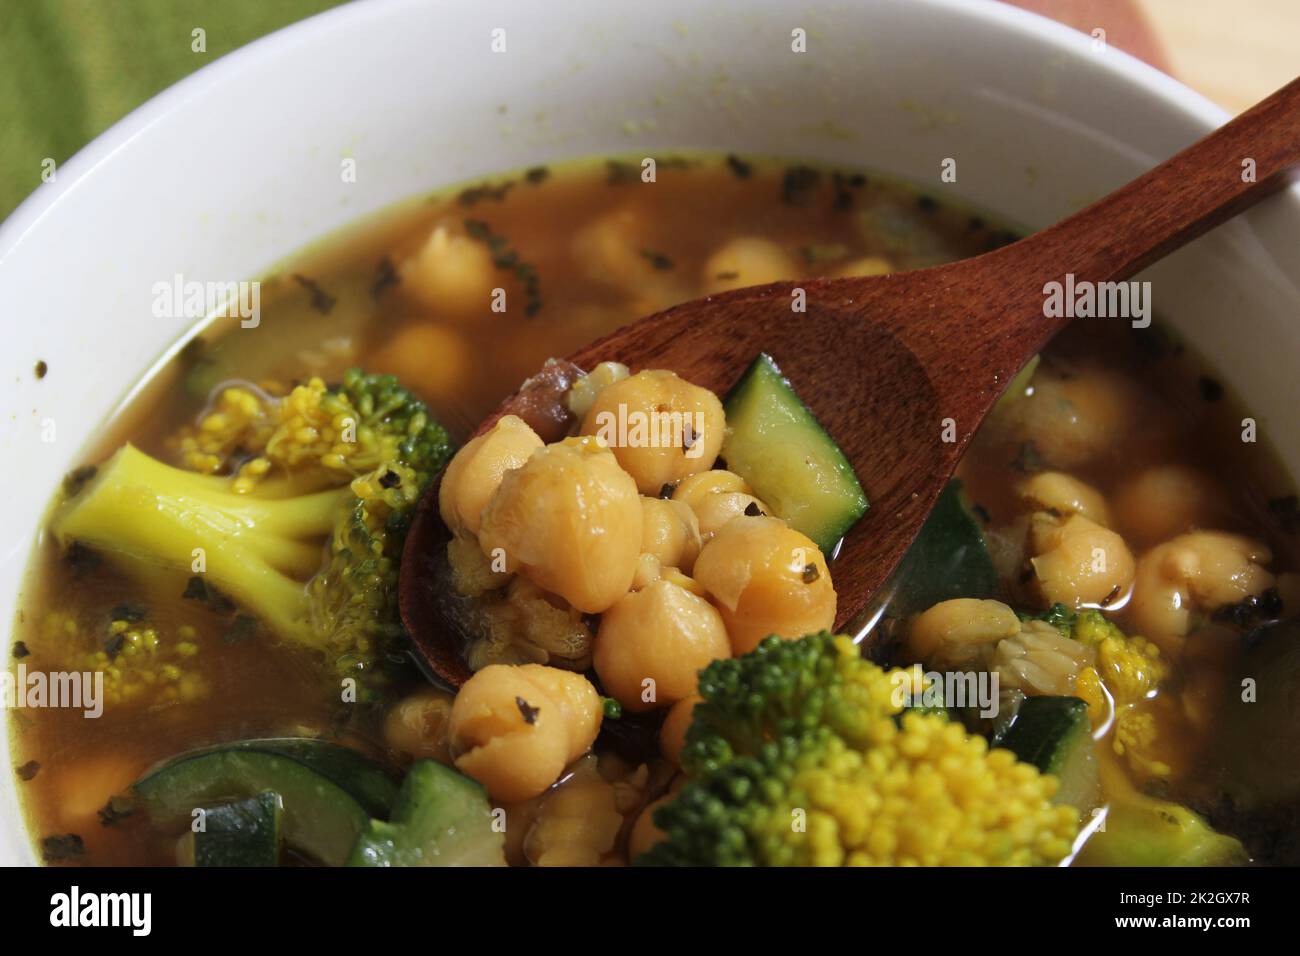 Close up of Bowl of Soup With Garbanzo Beans, Broccoli and Zucchini Stock Photo